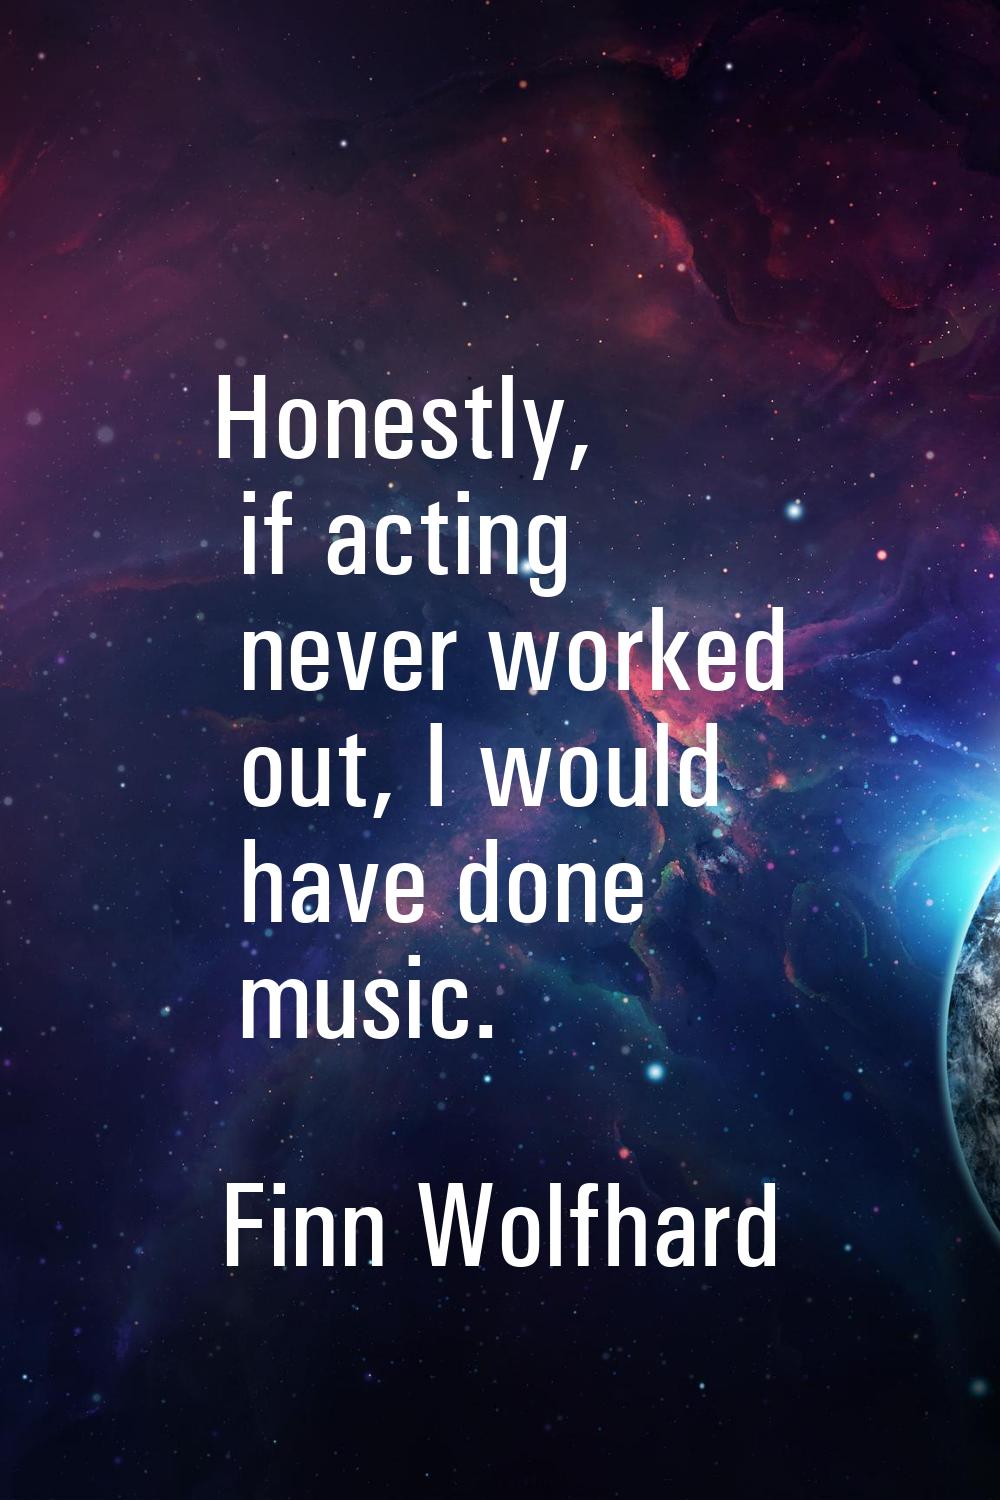 Honestly, if acting never worked out, I would have done music.